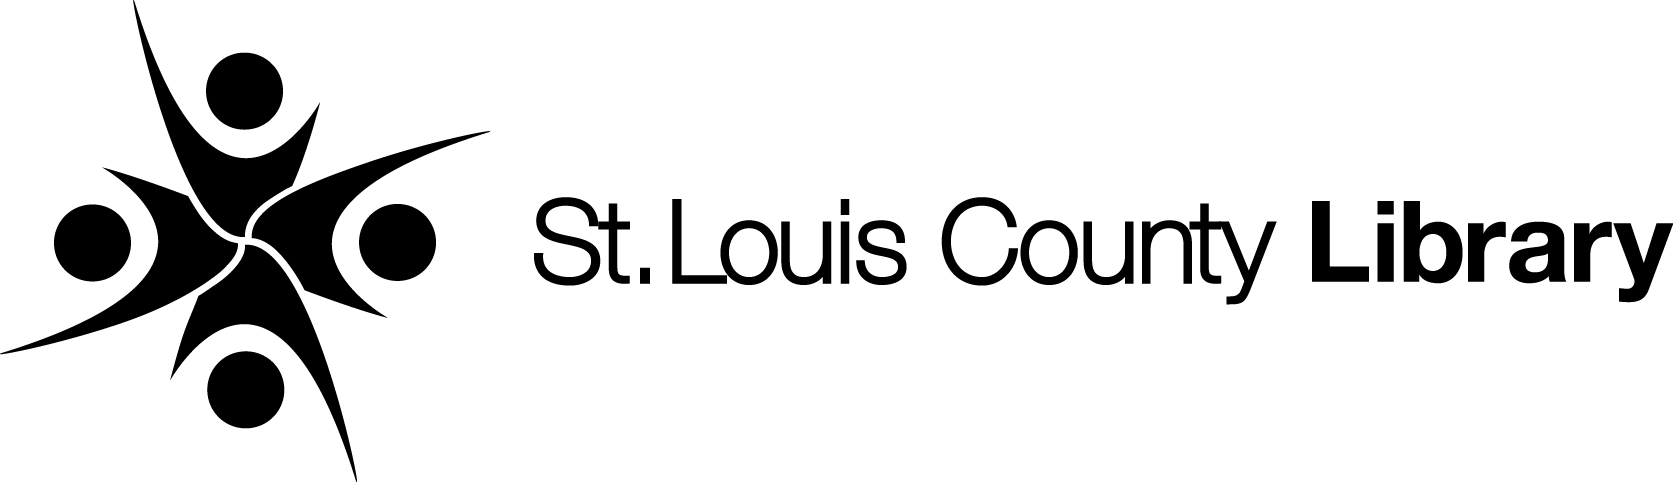 St Louis County Libraries logo